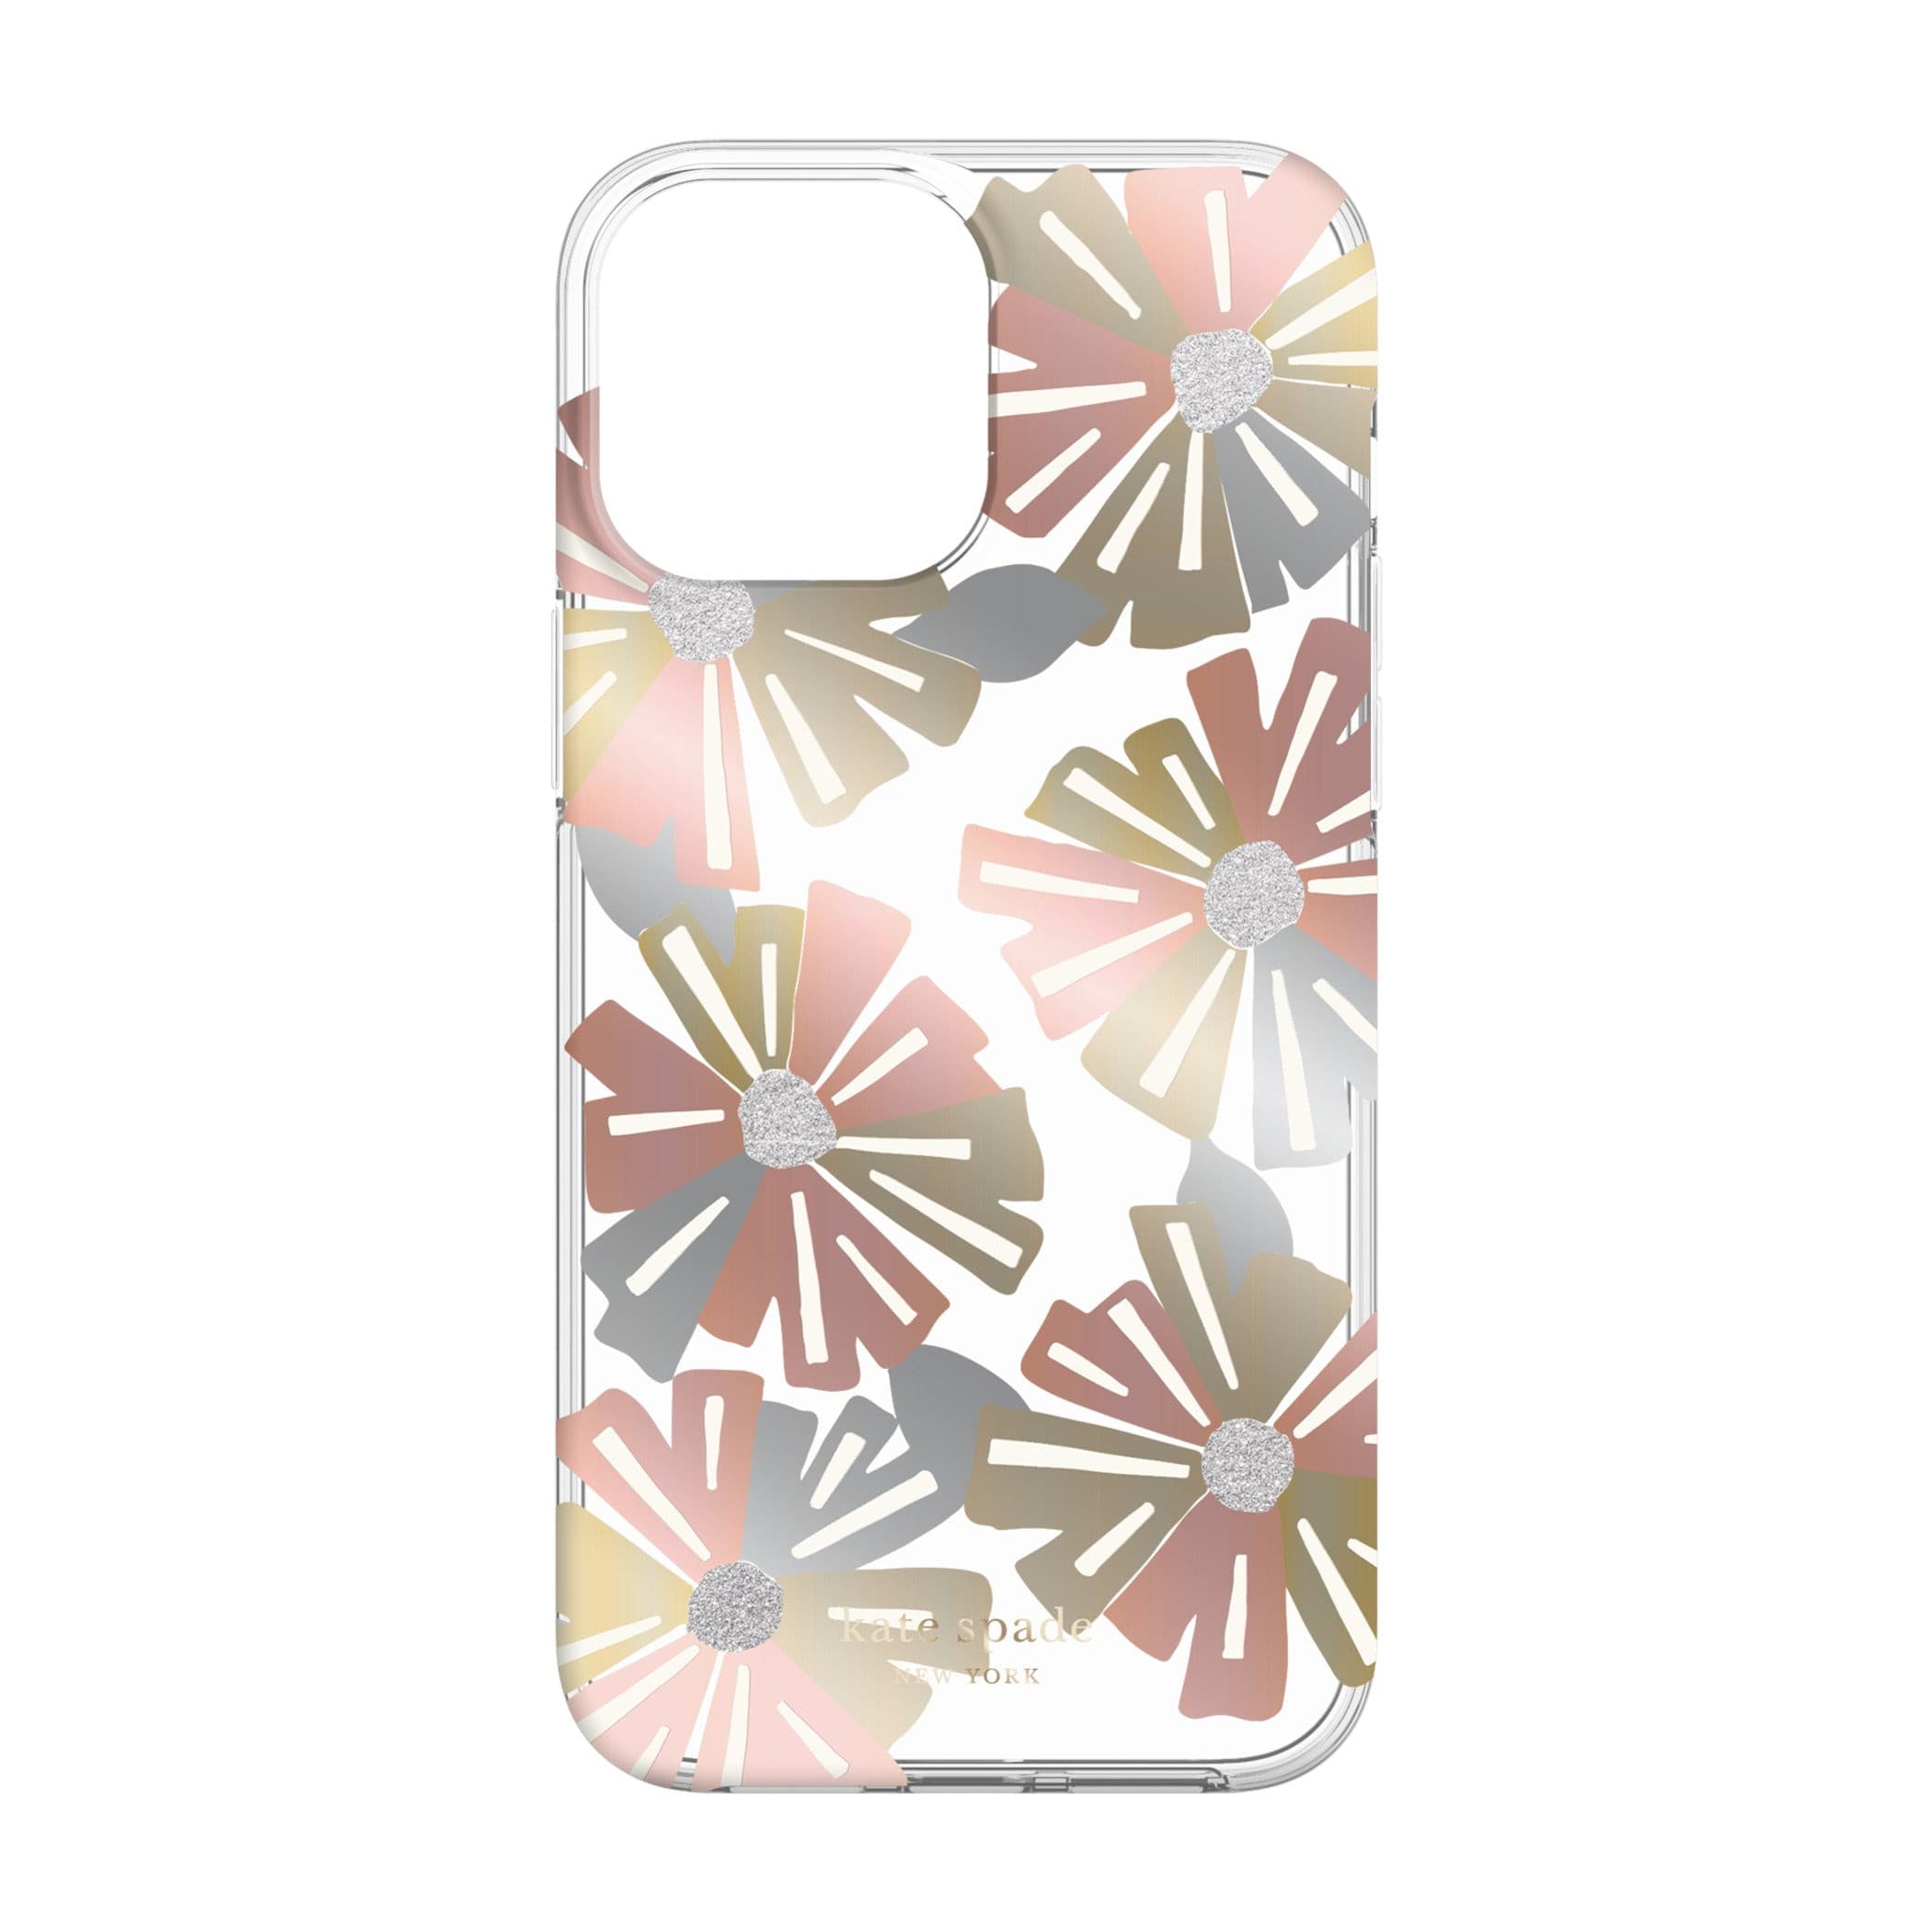 Kate Spade New York Protective Hardshell for iPhone 13 Pro Max.